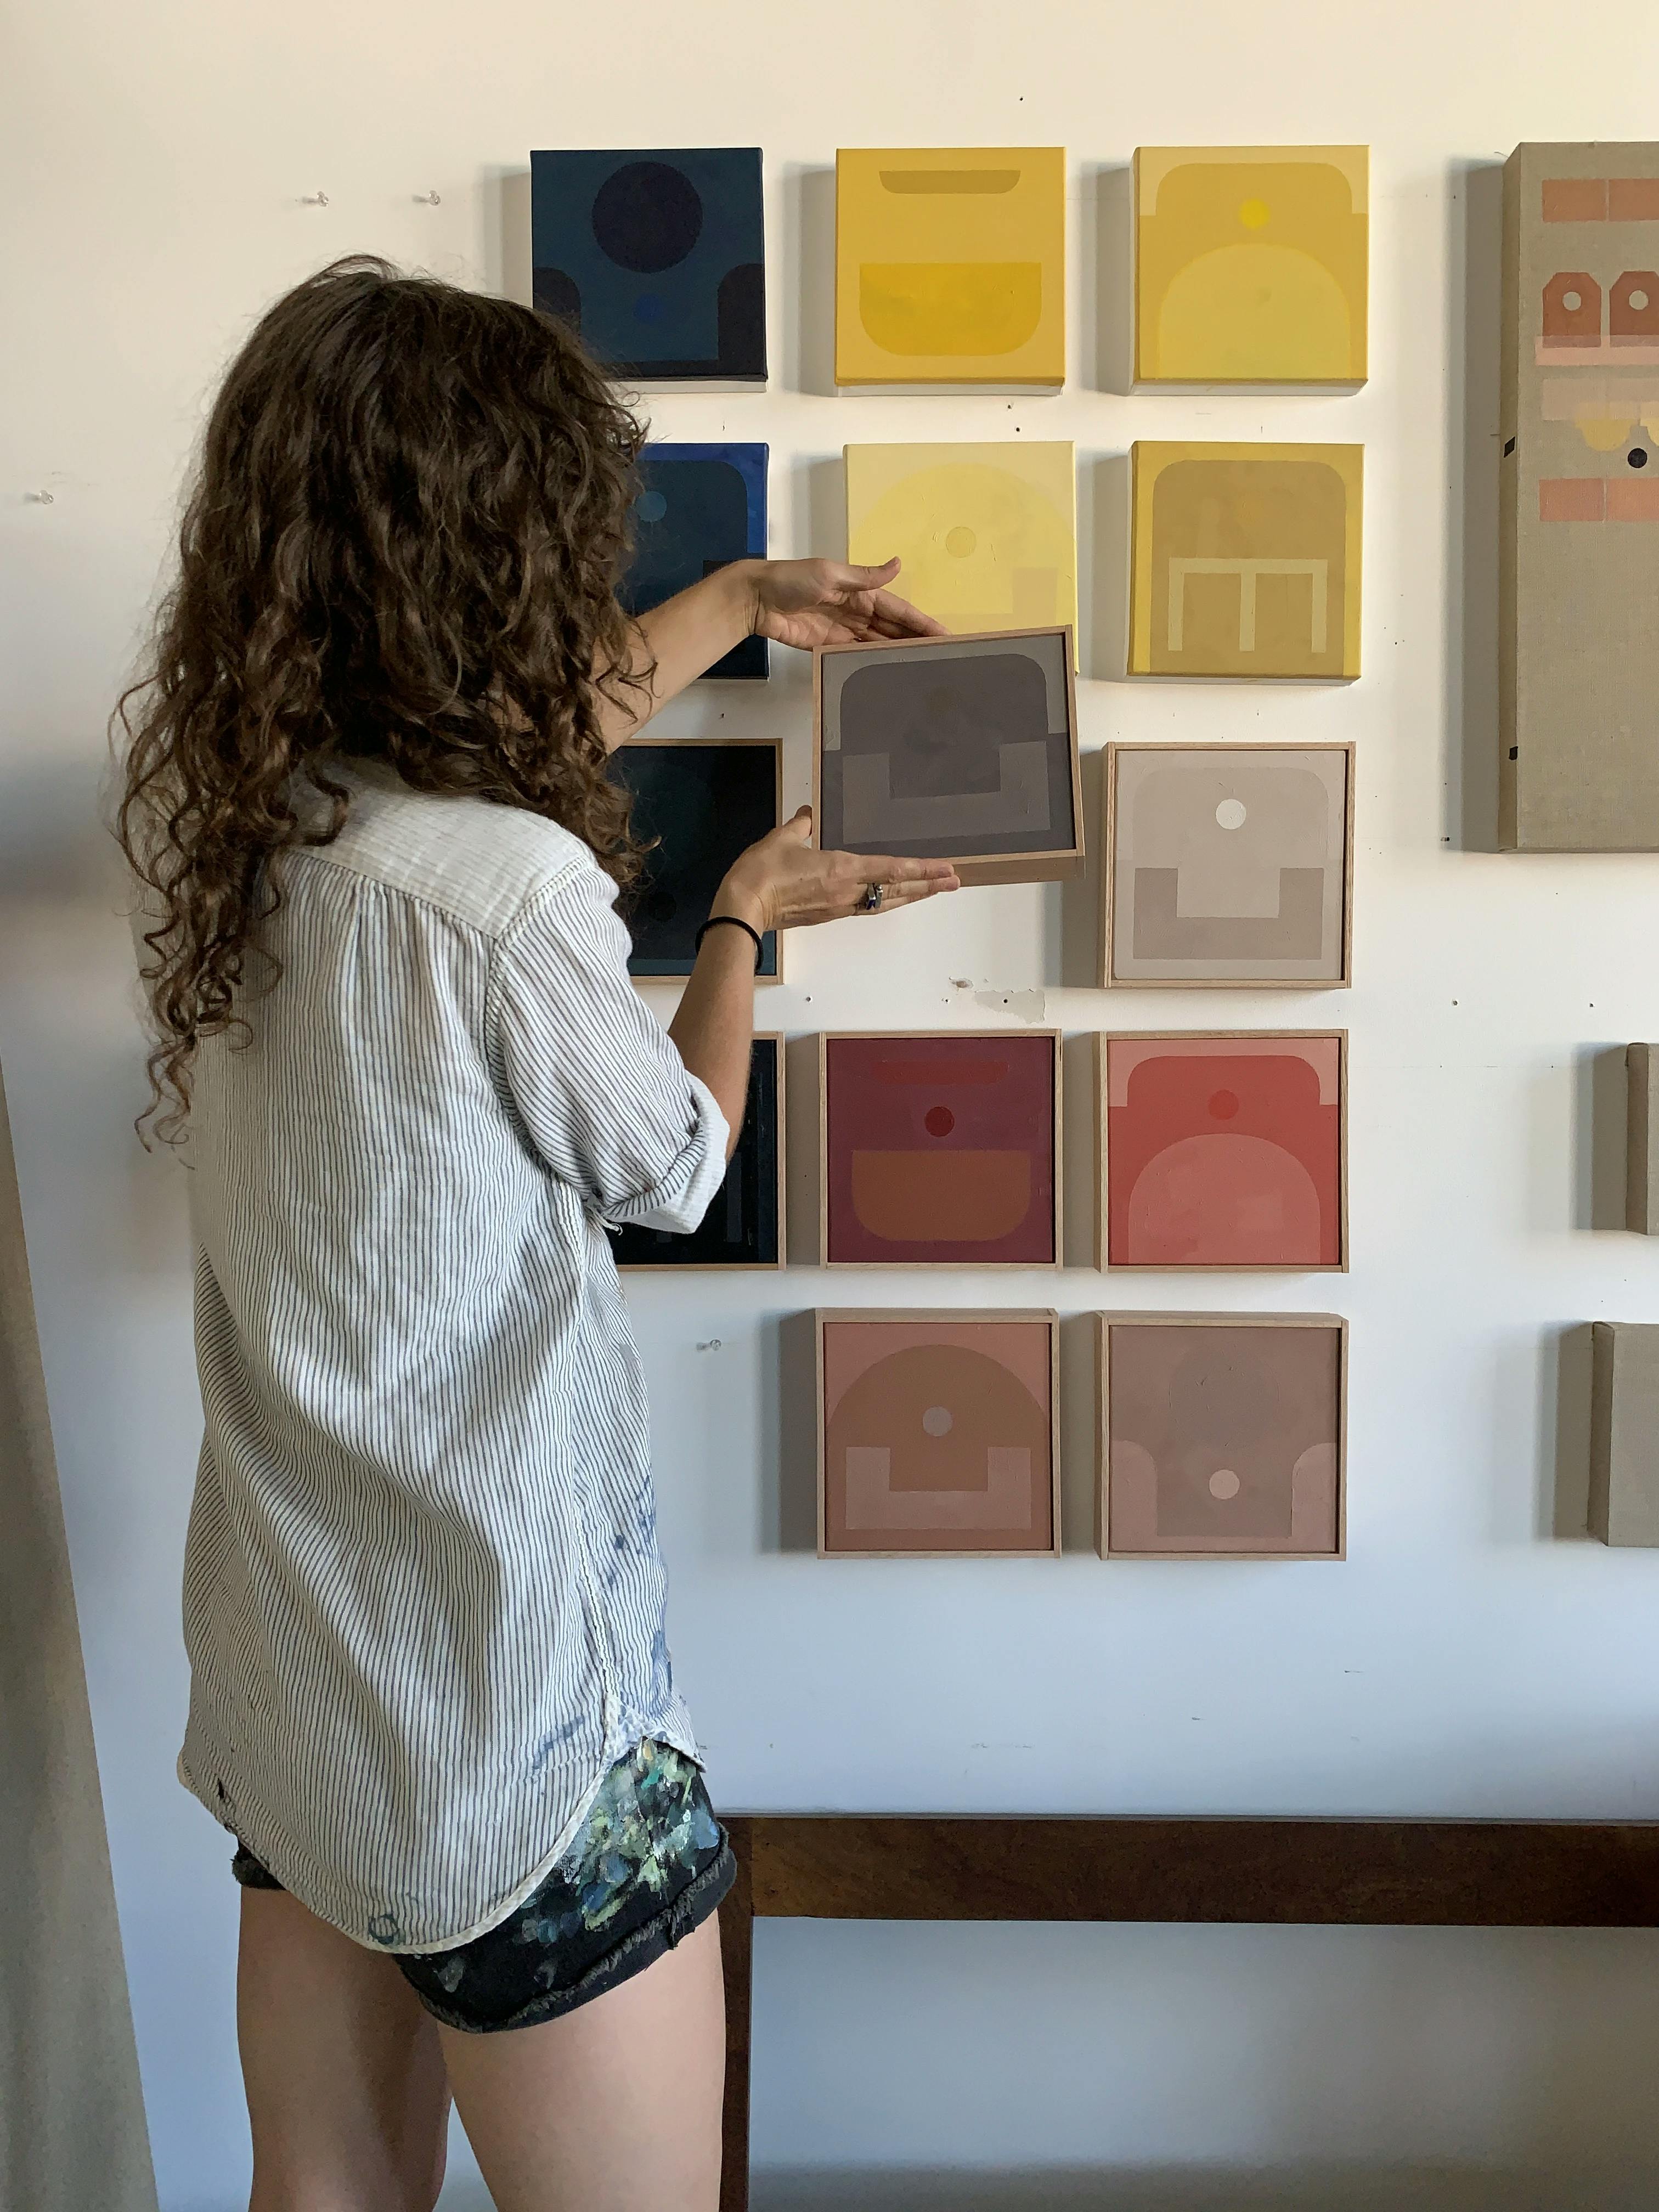 Artist Carla Weeks inside her studio in front of a grid of her small monochrome paintings.